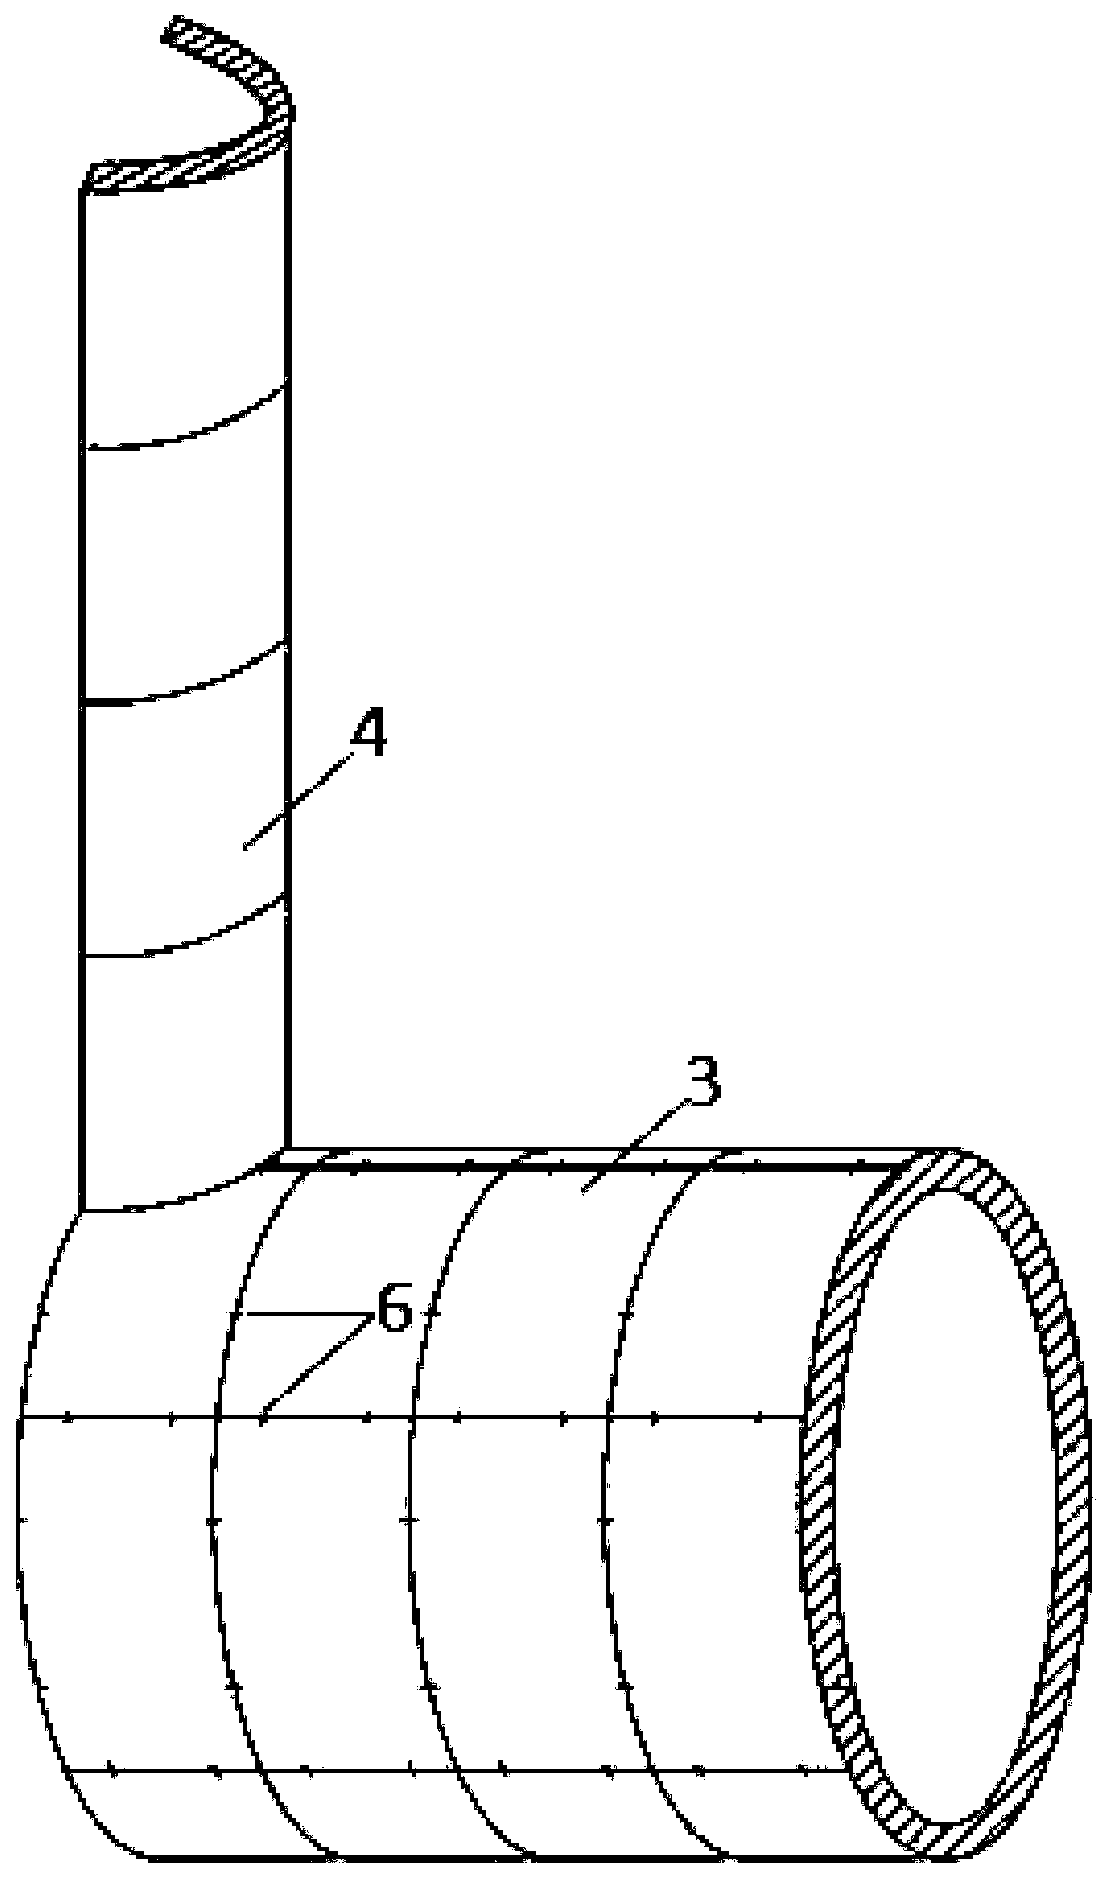 Shielding shaft vertical jacking mold testing device and method